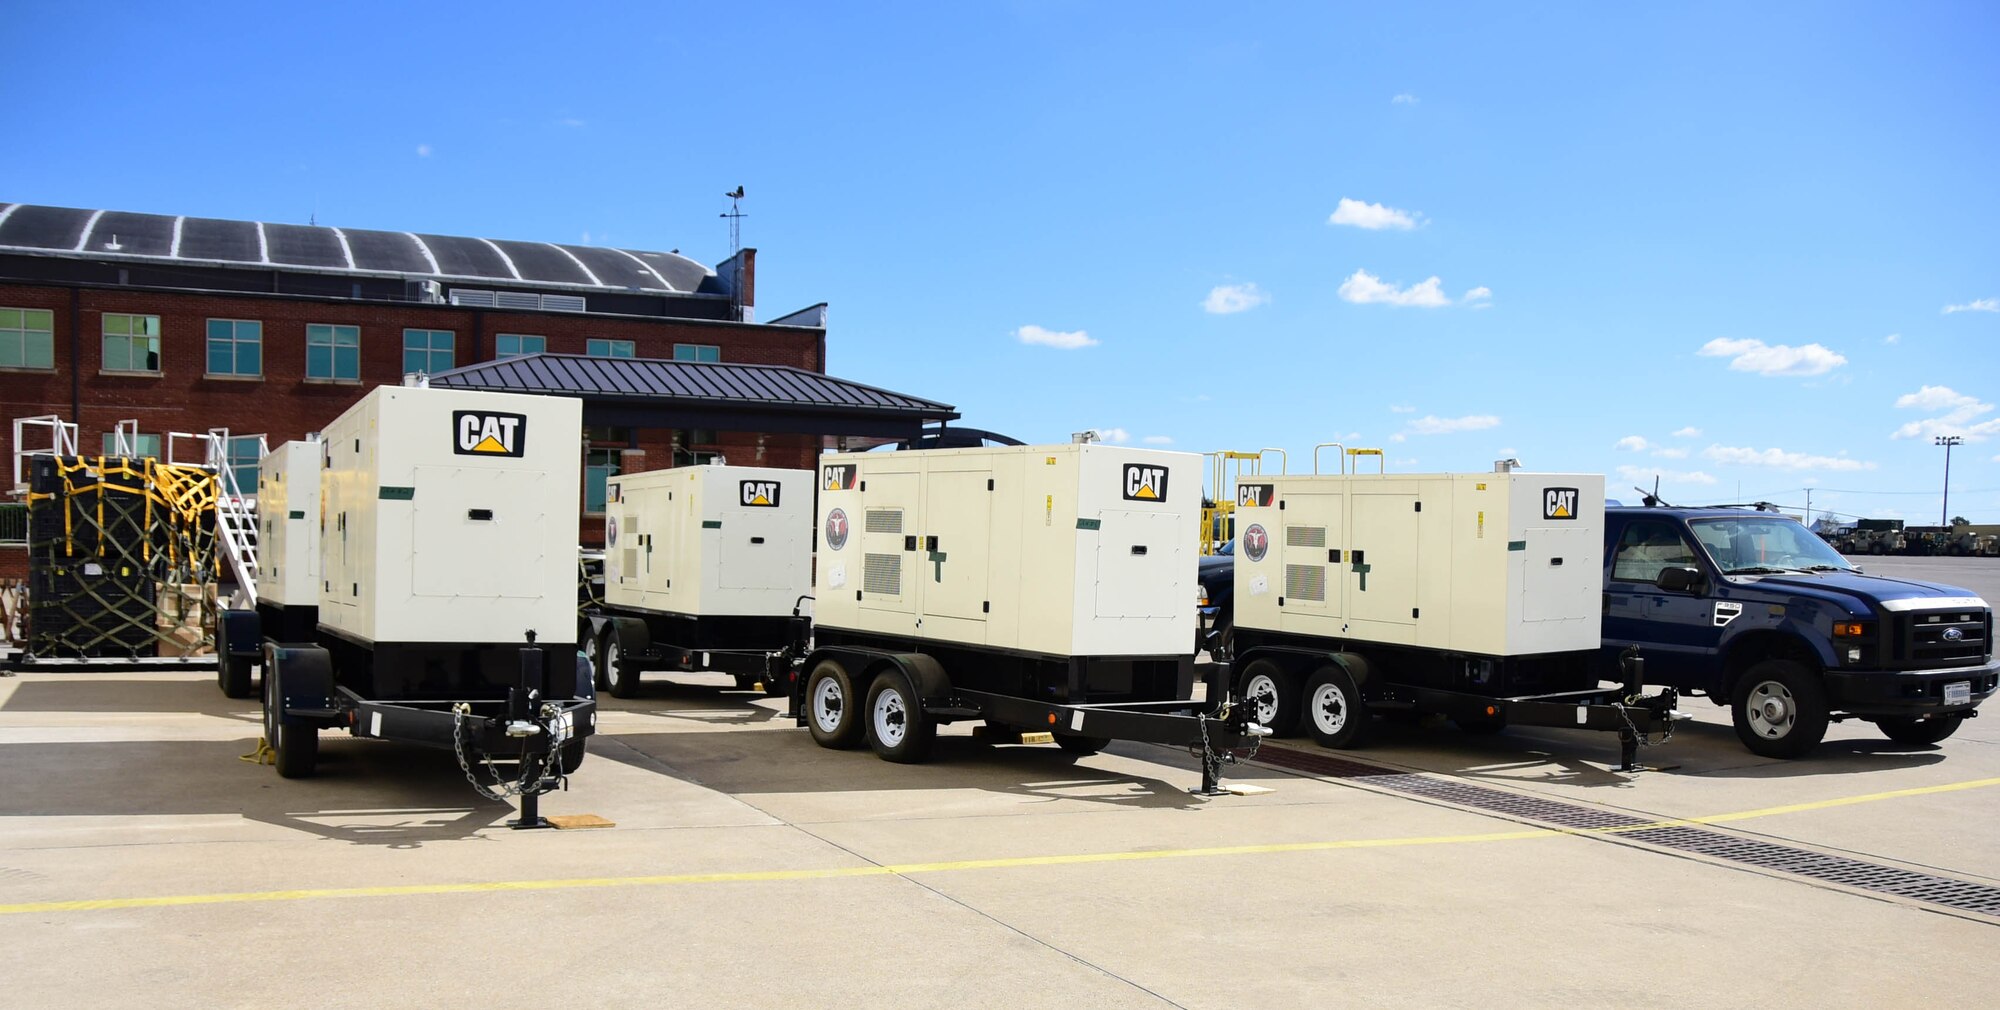 Prime Power equipment from the 118th Civil Engineer Squadron (CES) waits on the tarmac at Berry Field Air National Guard Base, Nashville Tenn. on Oct 3, 2017.